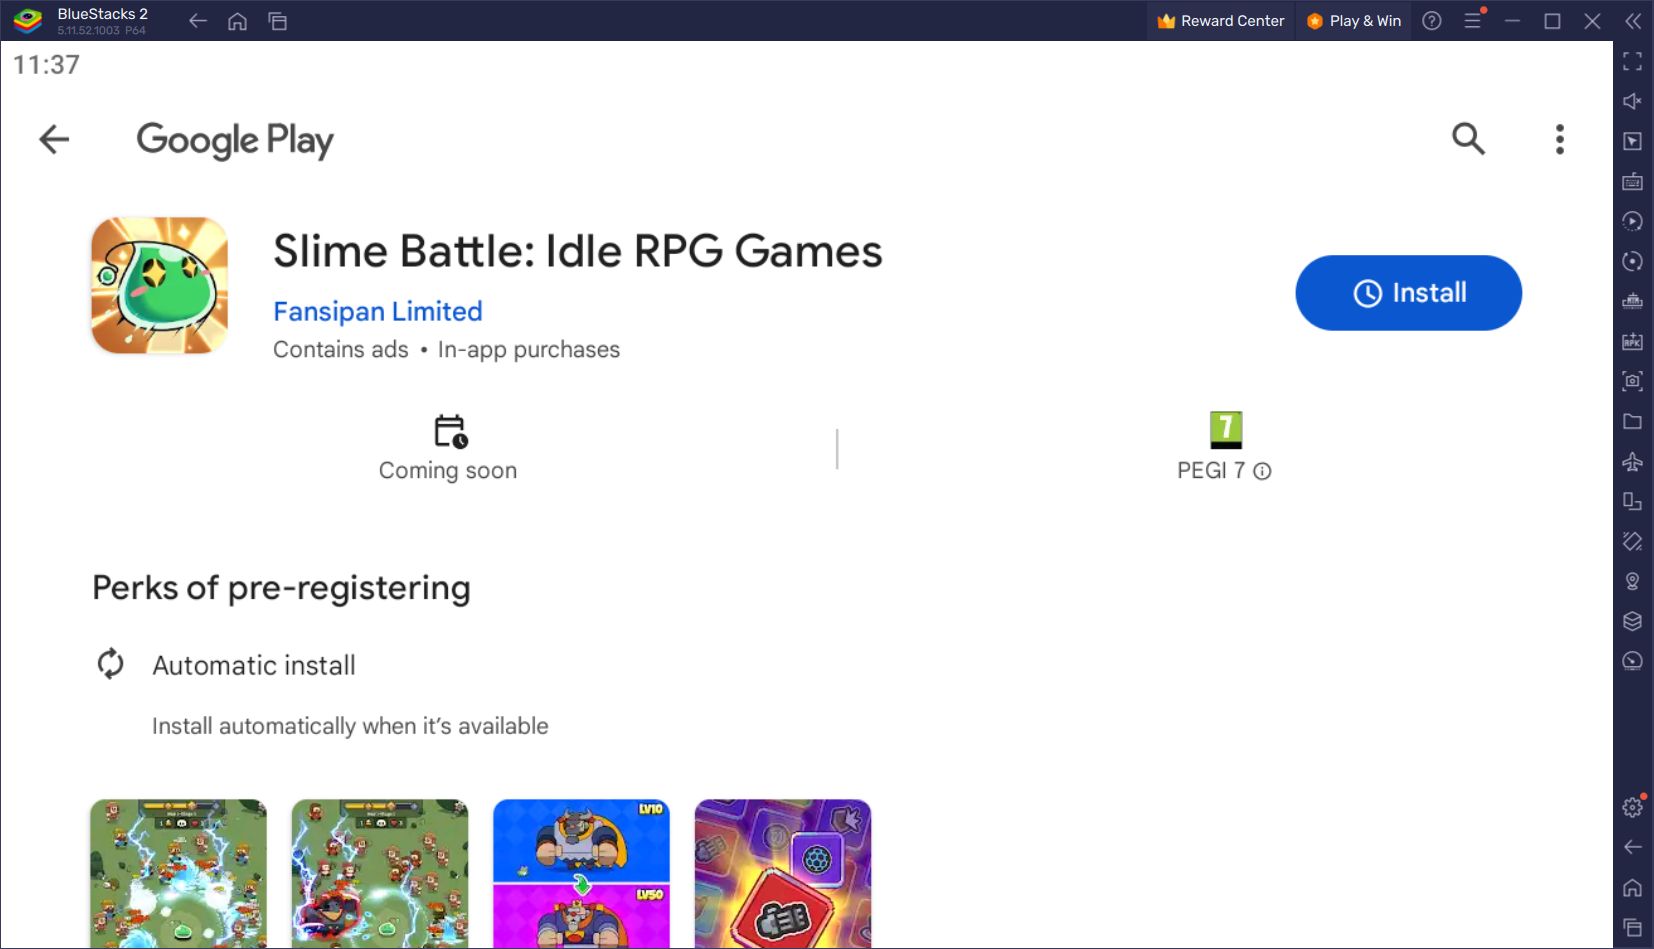 Warship Legend: Idle RPG - Apps on Google Play